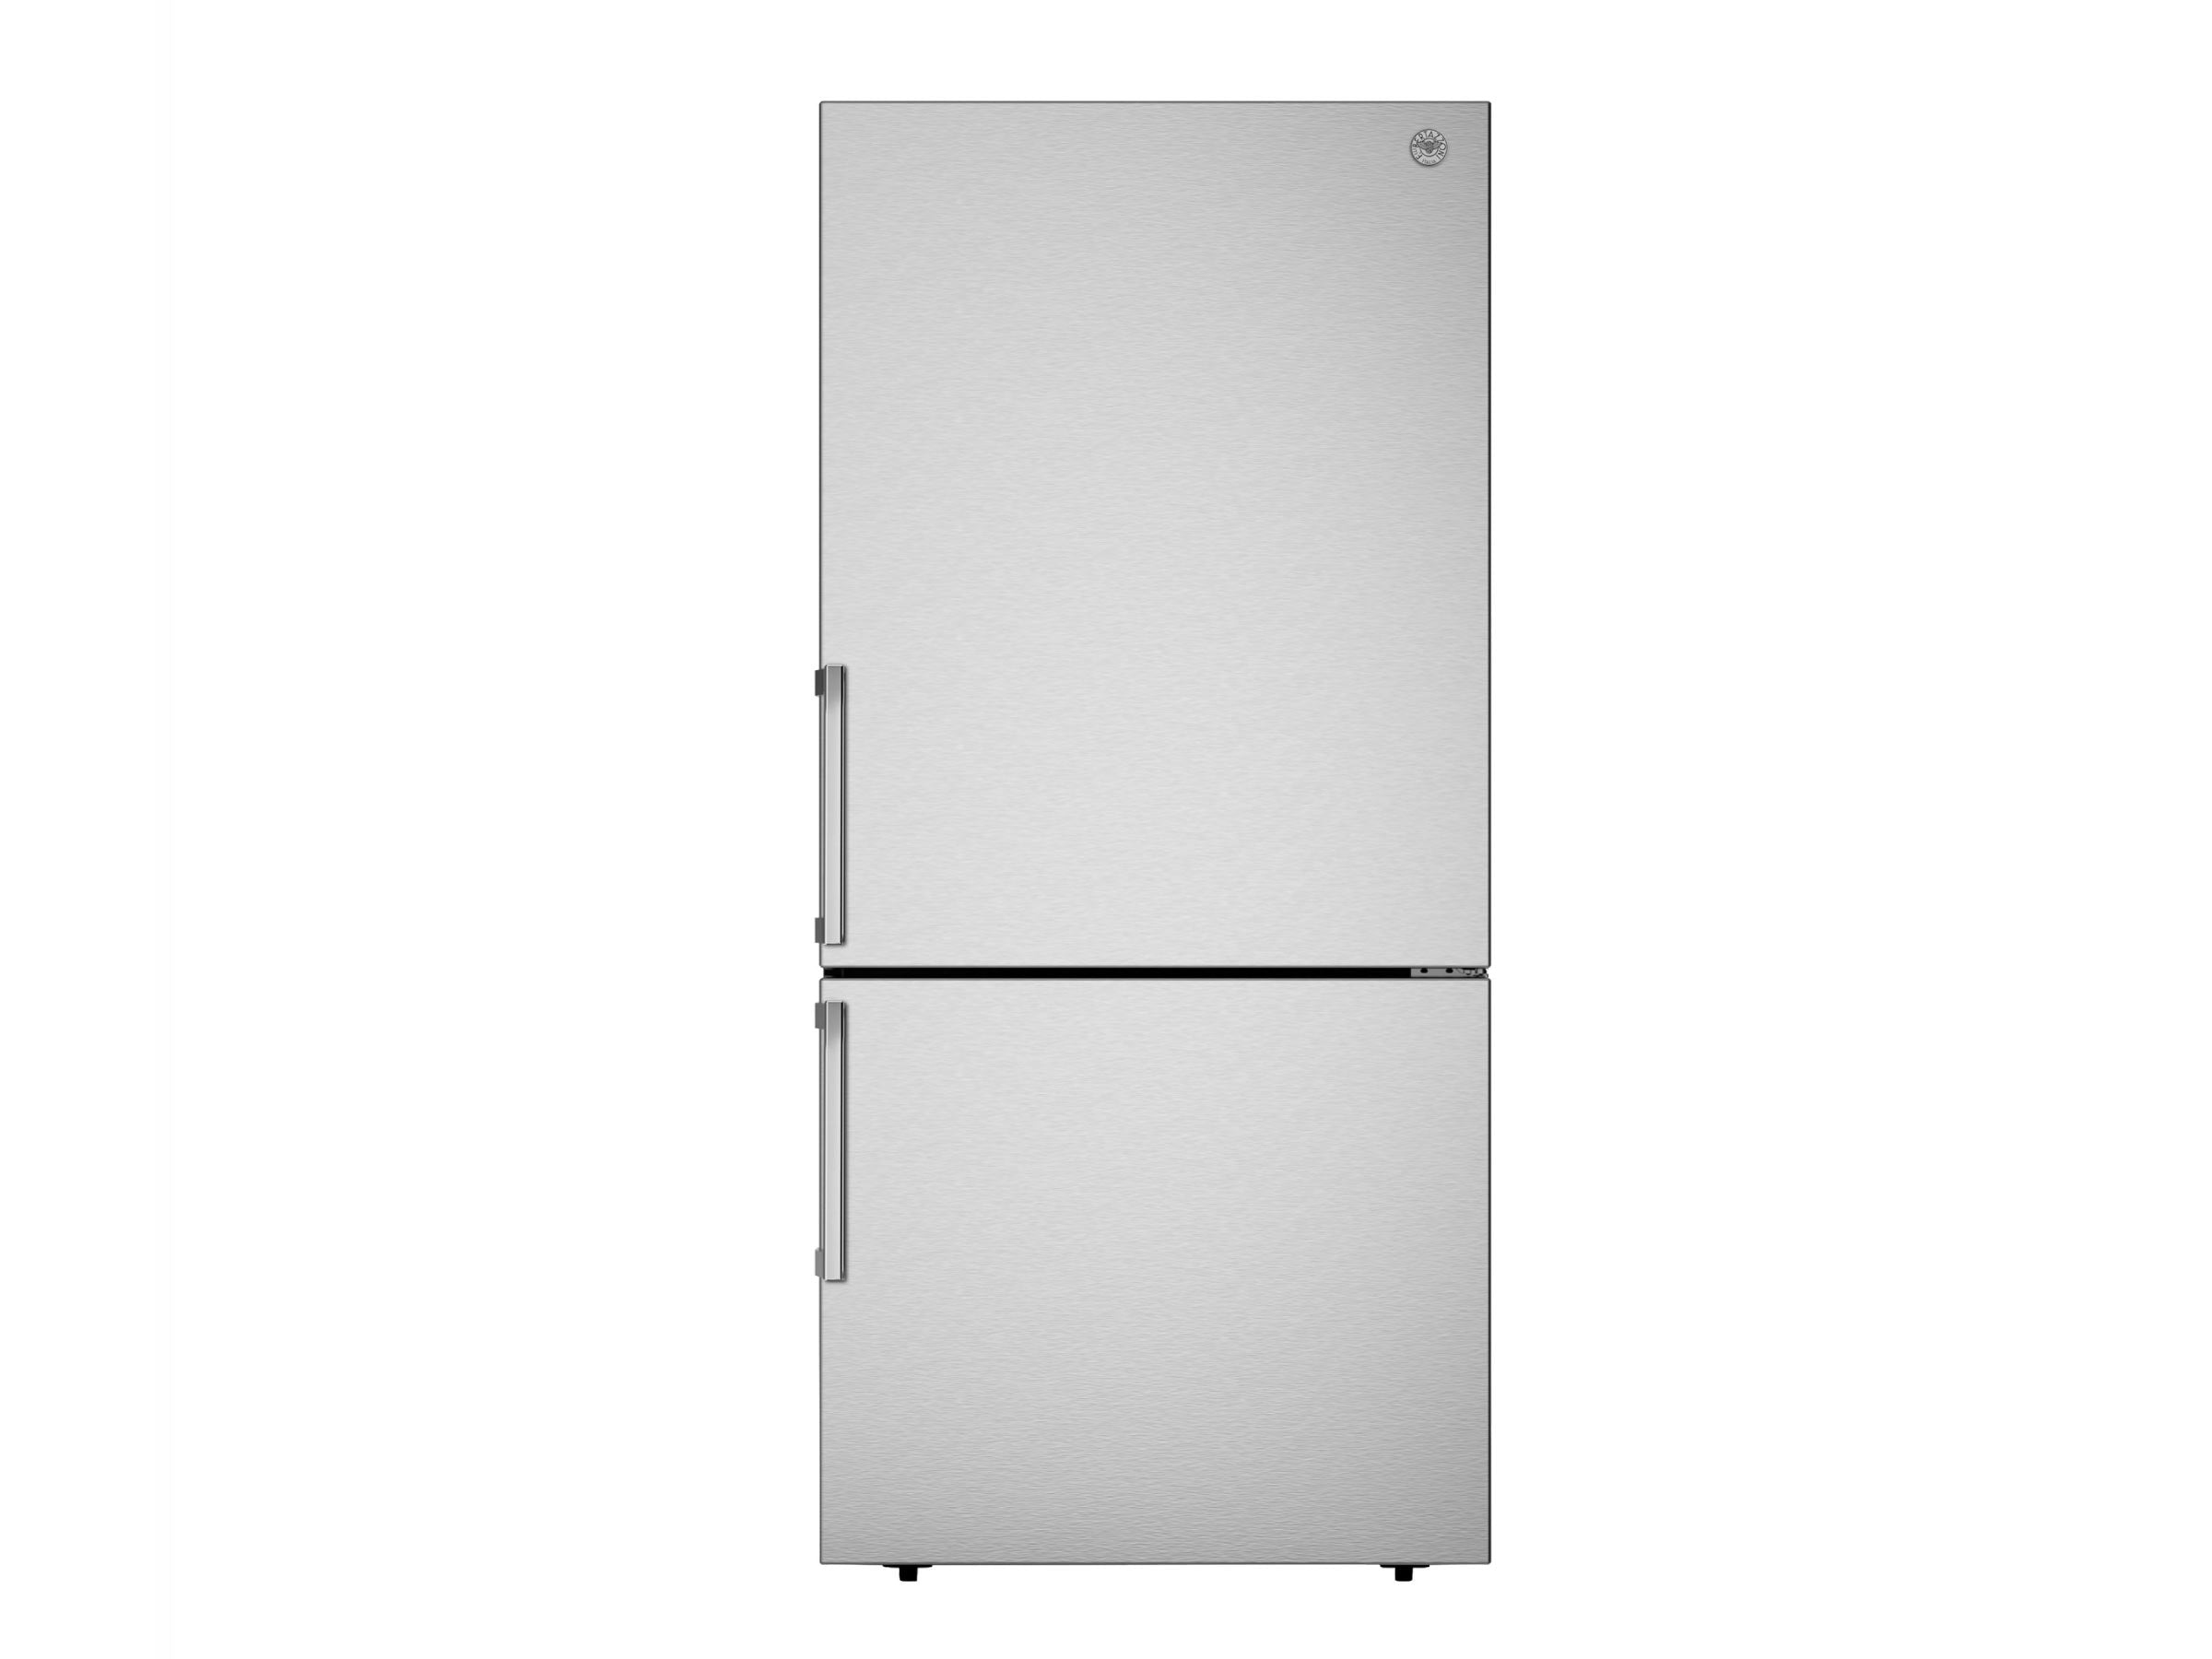 Bertazzoni 31" 17.1 Cu.Ft. Stainless Steel Freestanding Bottom Mount Refrigerator With Automatic Ice Maker and Reversible Door REF31BMFIX Luxury Appliances Direct